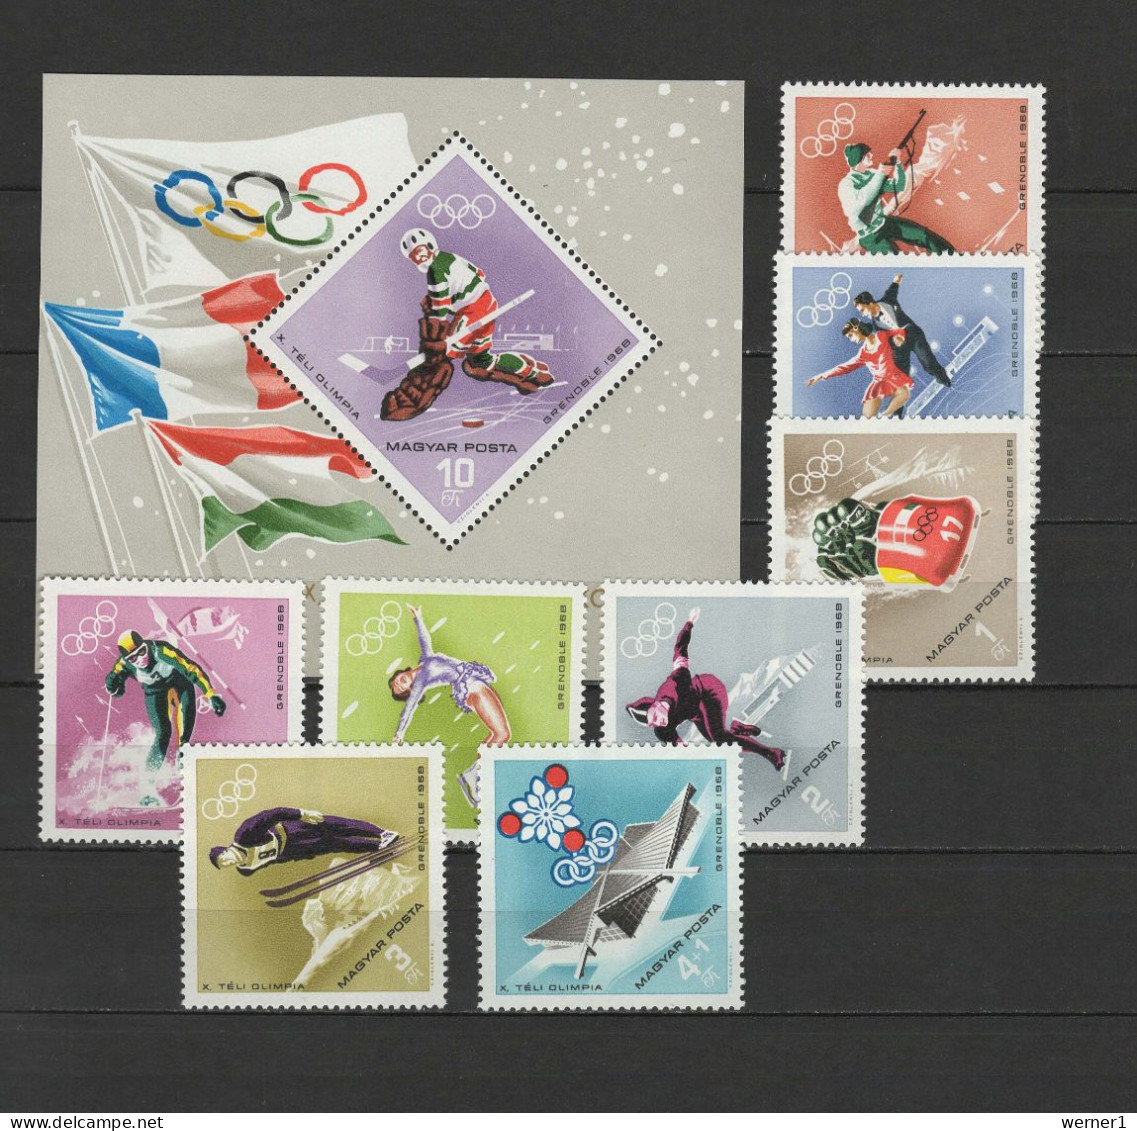 Hungary 1967/1968 Olympic Games Grenoble Set Of 8 + S/s MNH - Hiver 1968: Grenoble